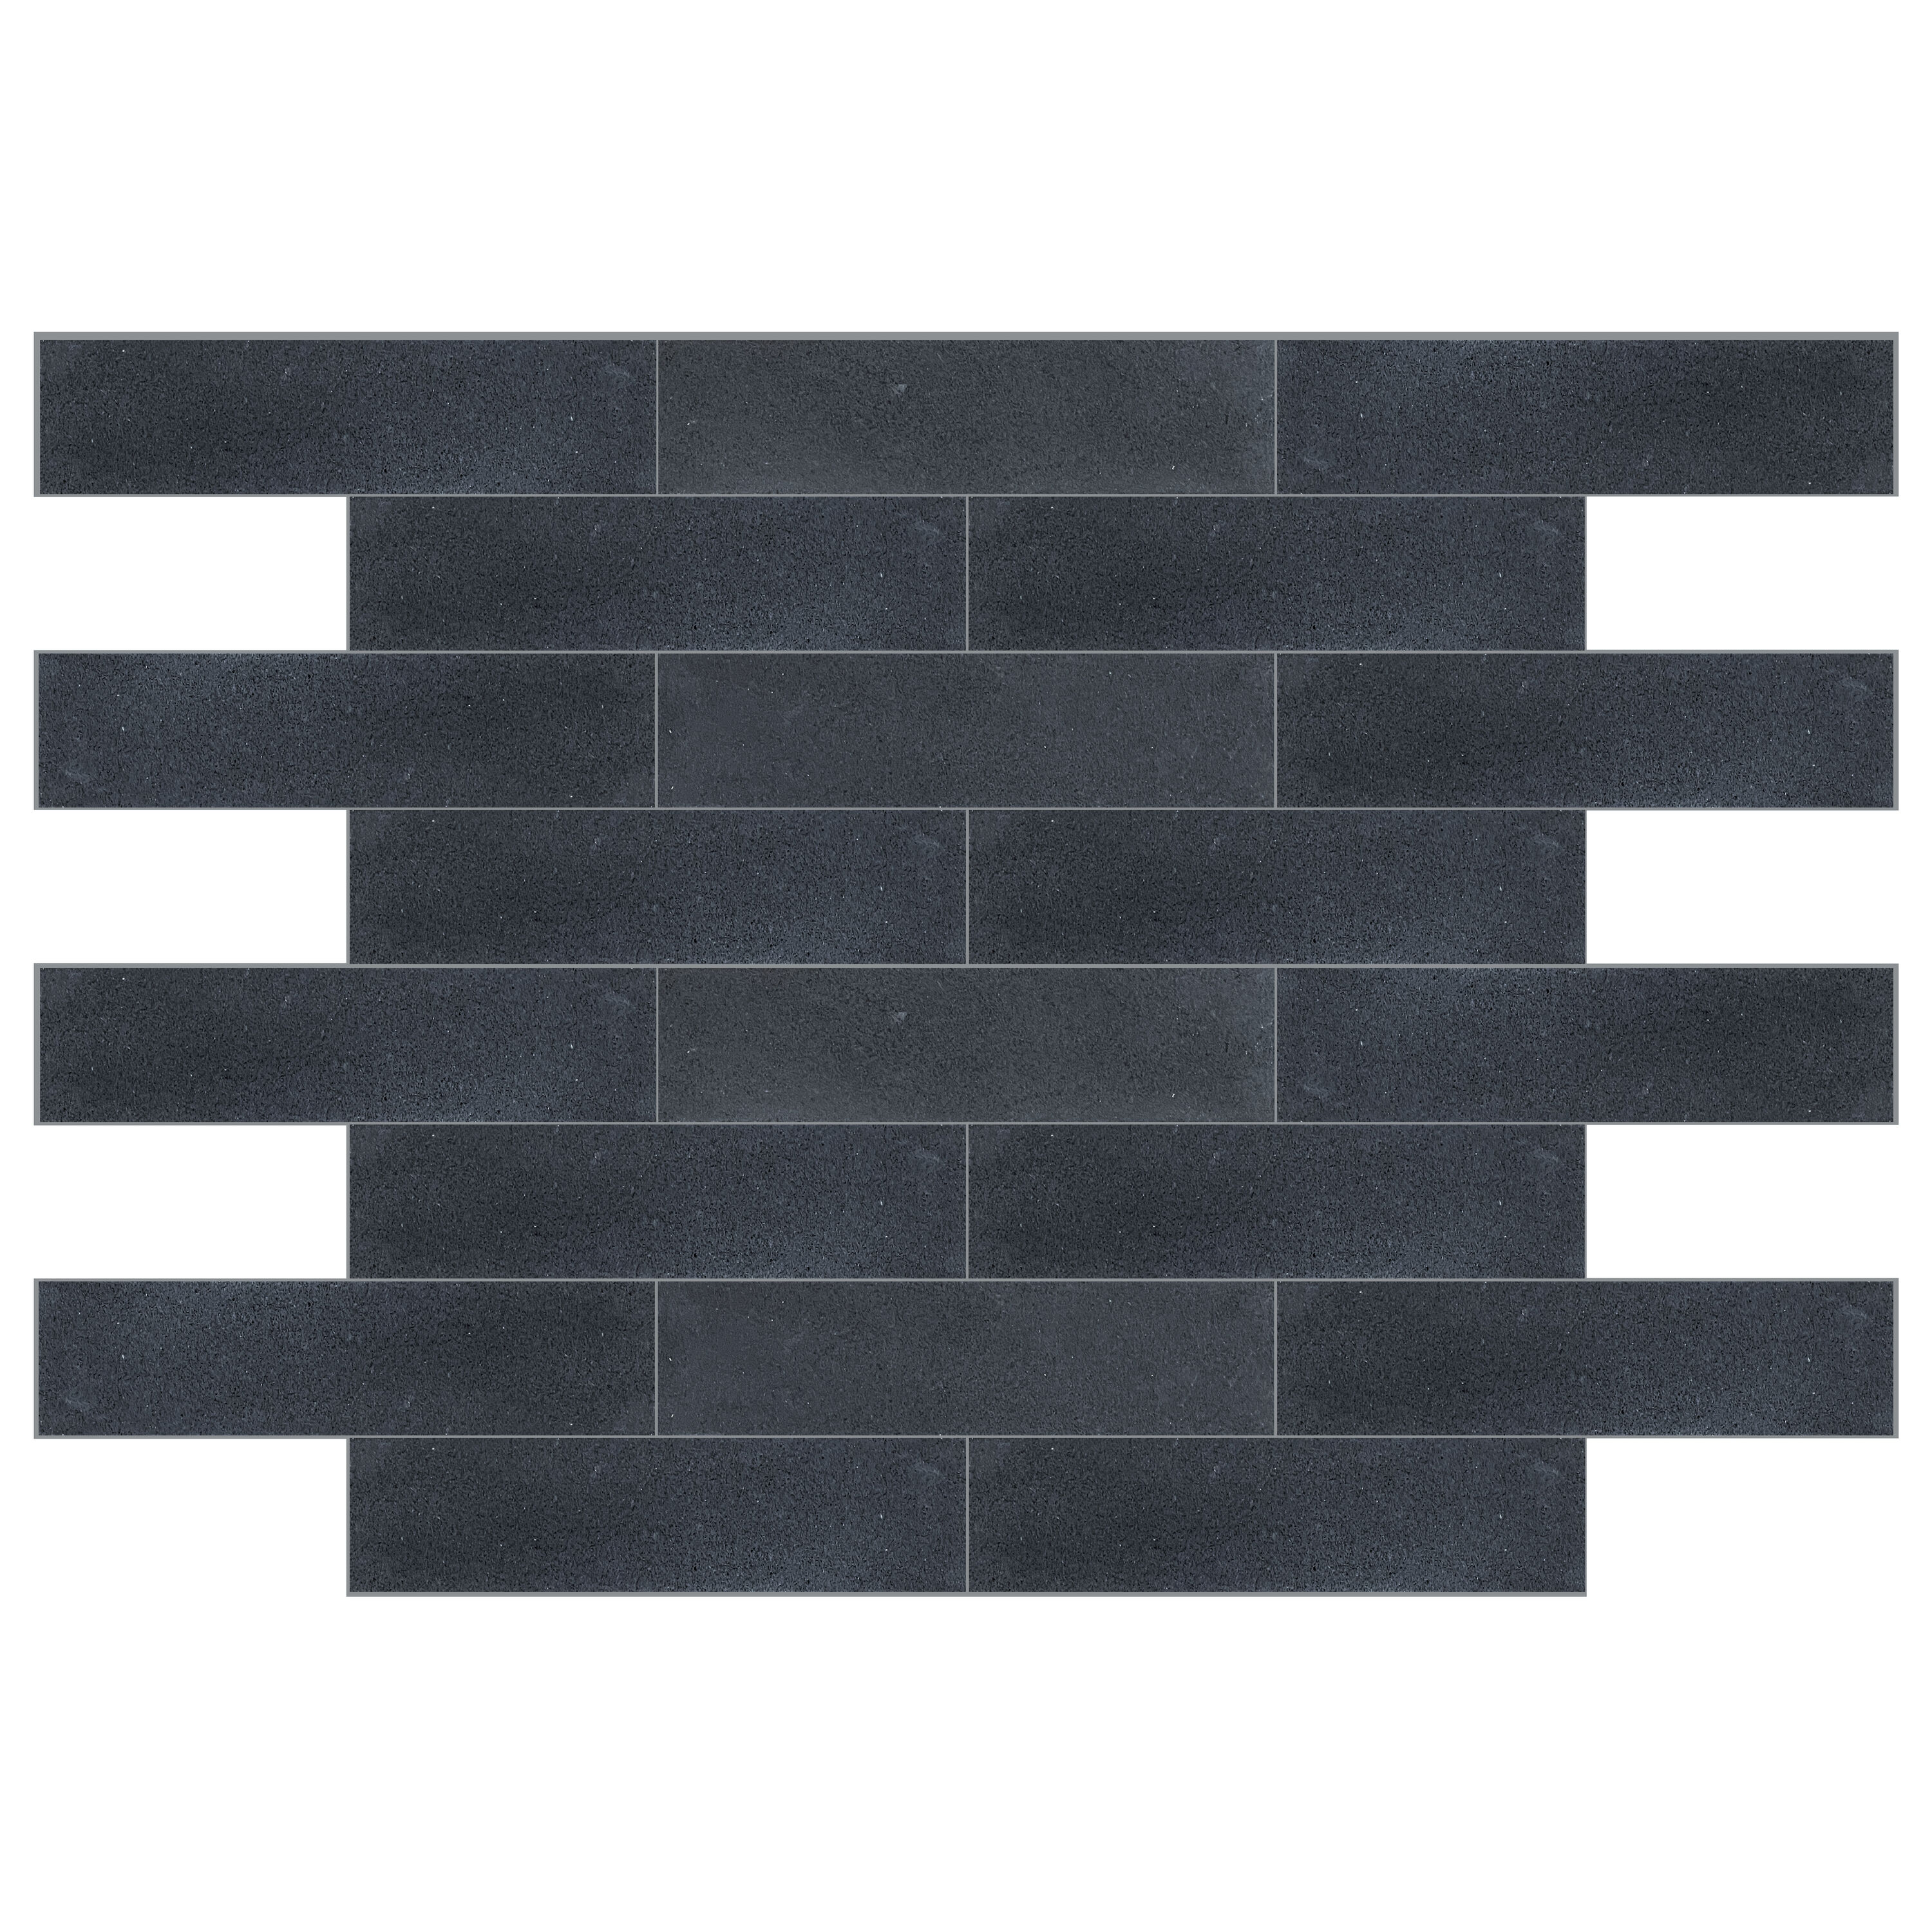 Basalt Charcoal 3-in x 12-in Honed Natural Stone Basalt Stone Look Floor and Wall Tile (0.24-sq. ft/ Piece) | - GBI Tile & Stone Inc. 5269585